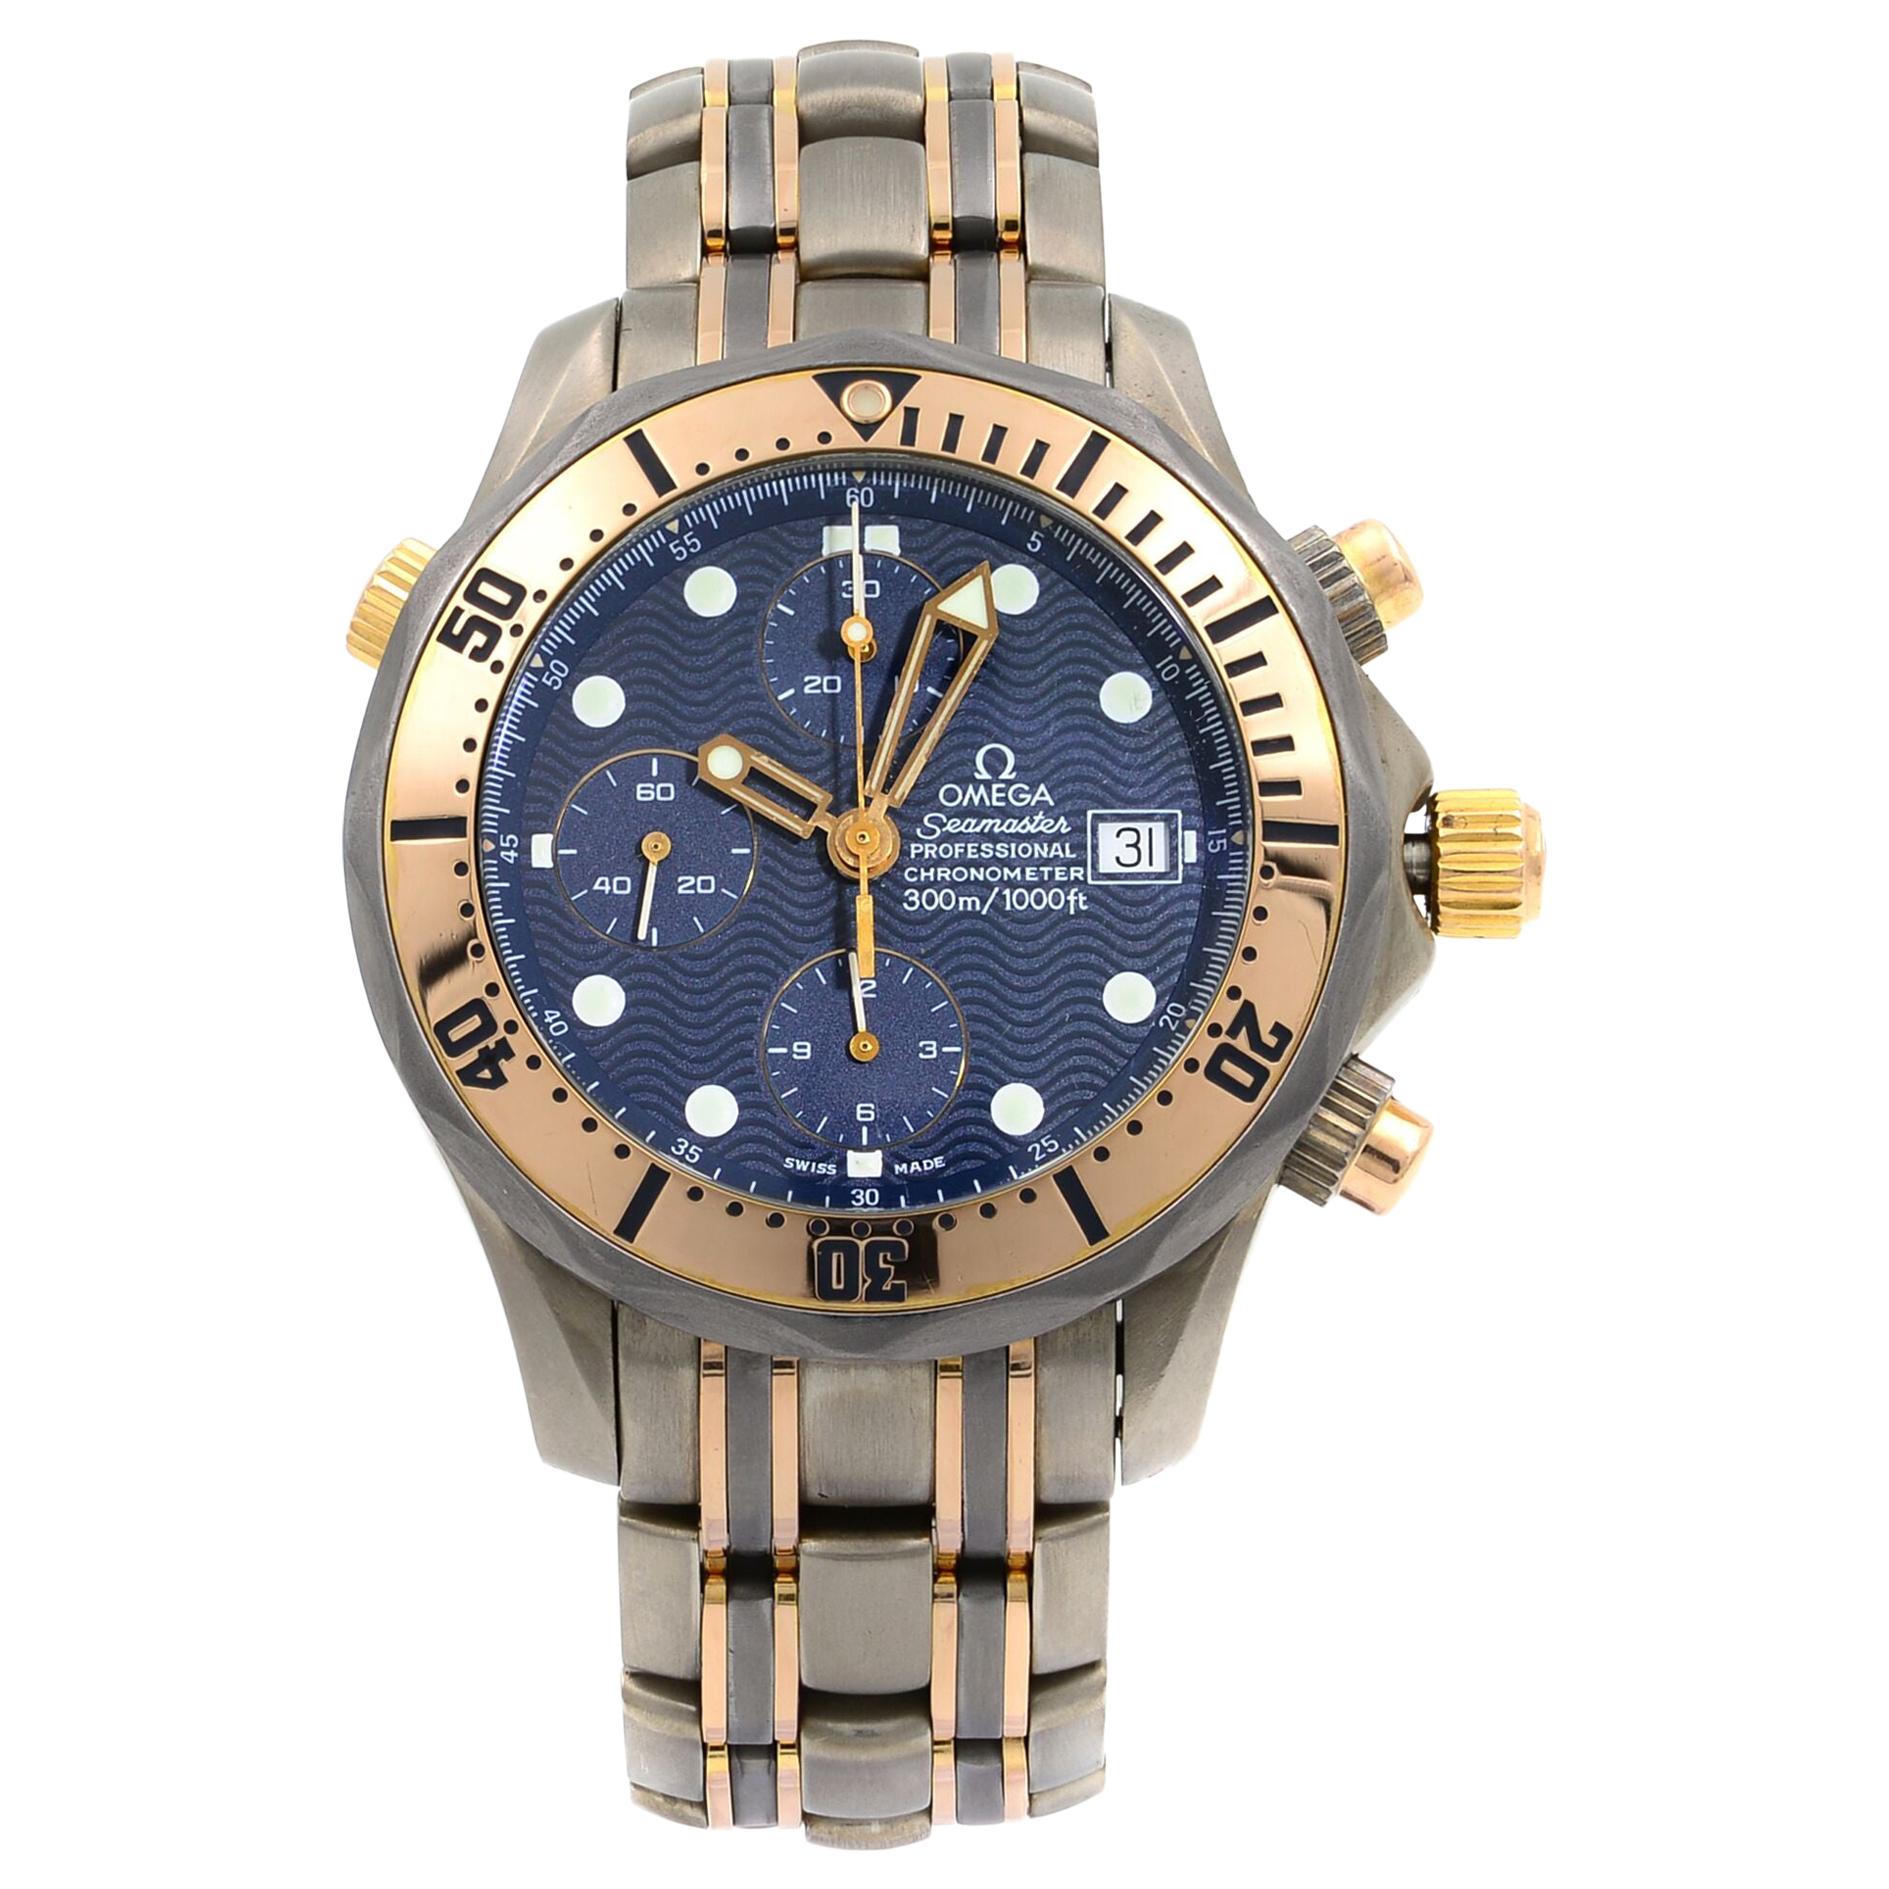 Omega Seamaster Diver 300M Chronograph Blue Dial Automatic Mens Watch 2296.80.00